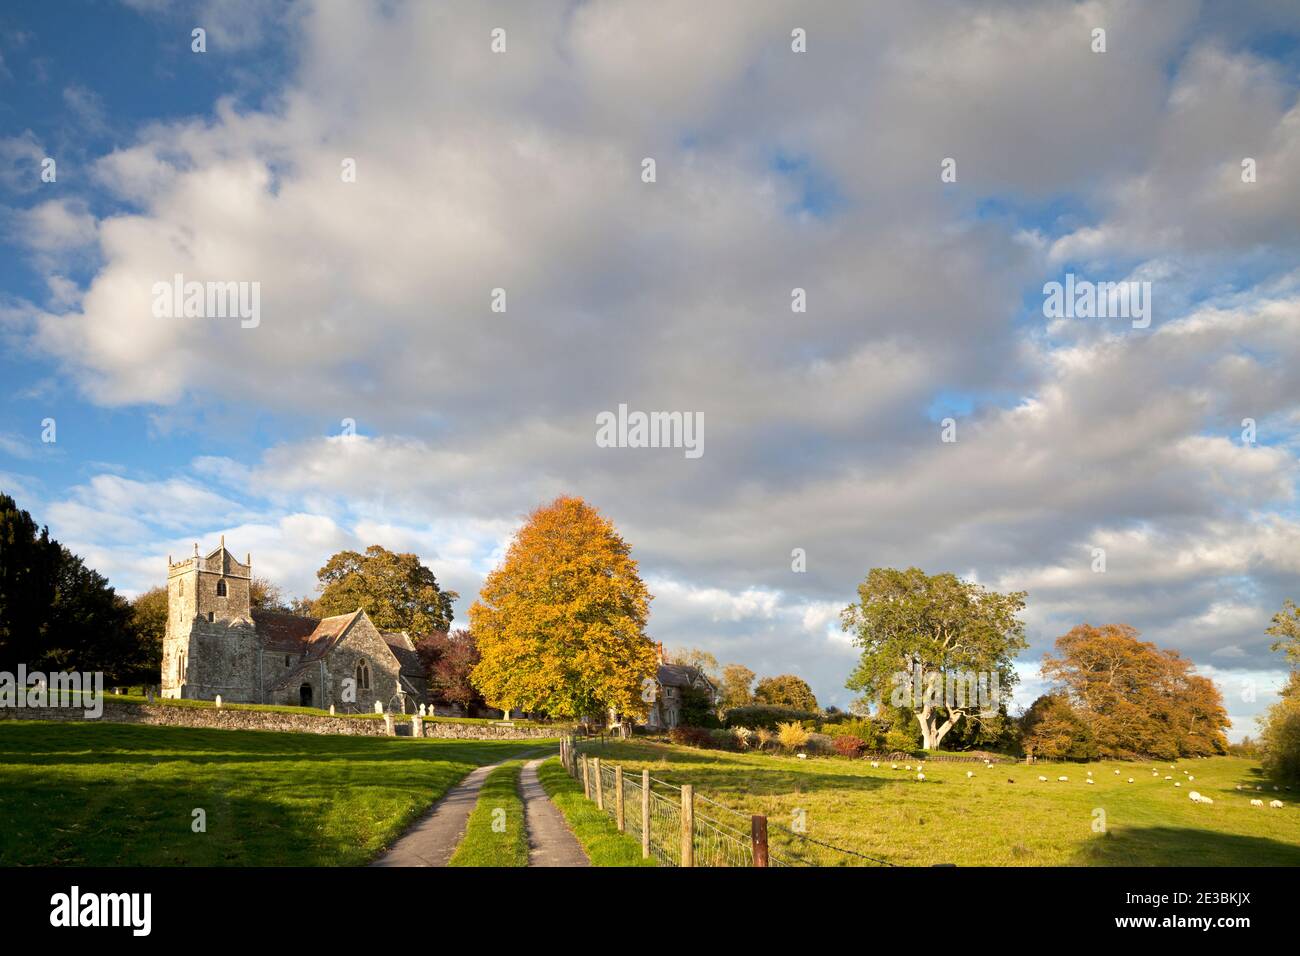 St Mary's Church in the village of Alvediston in Wiltshire. Stock Photo